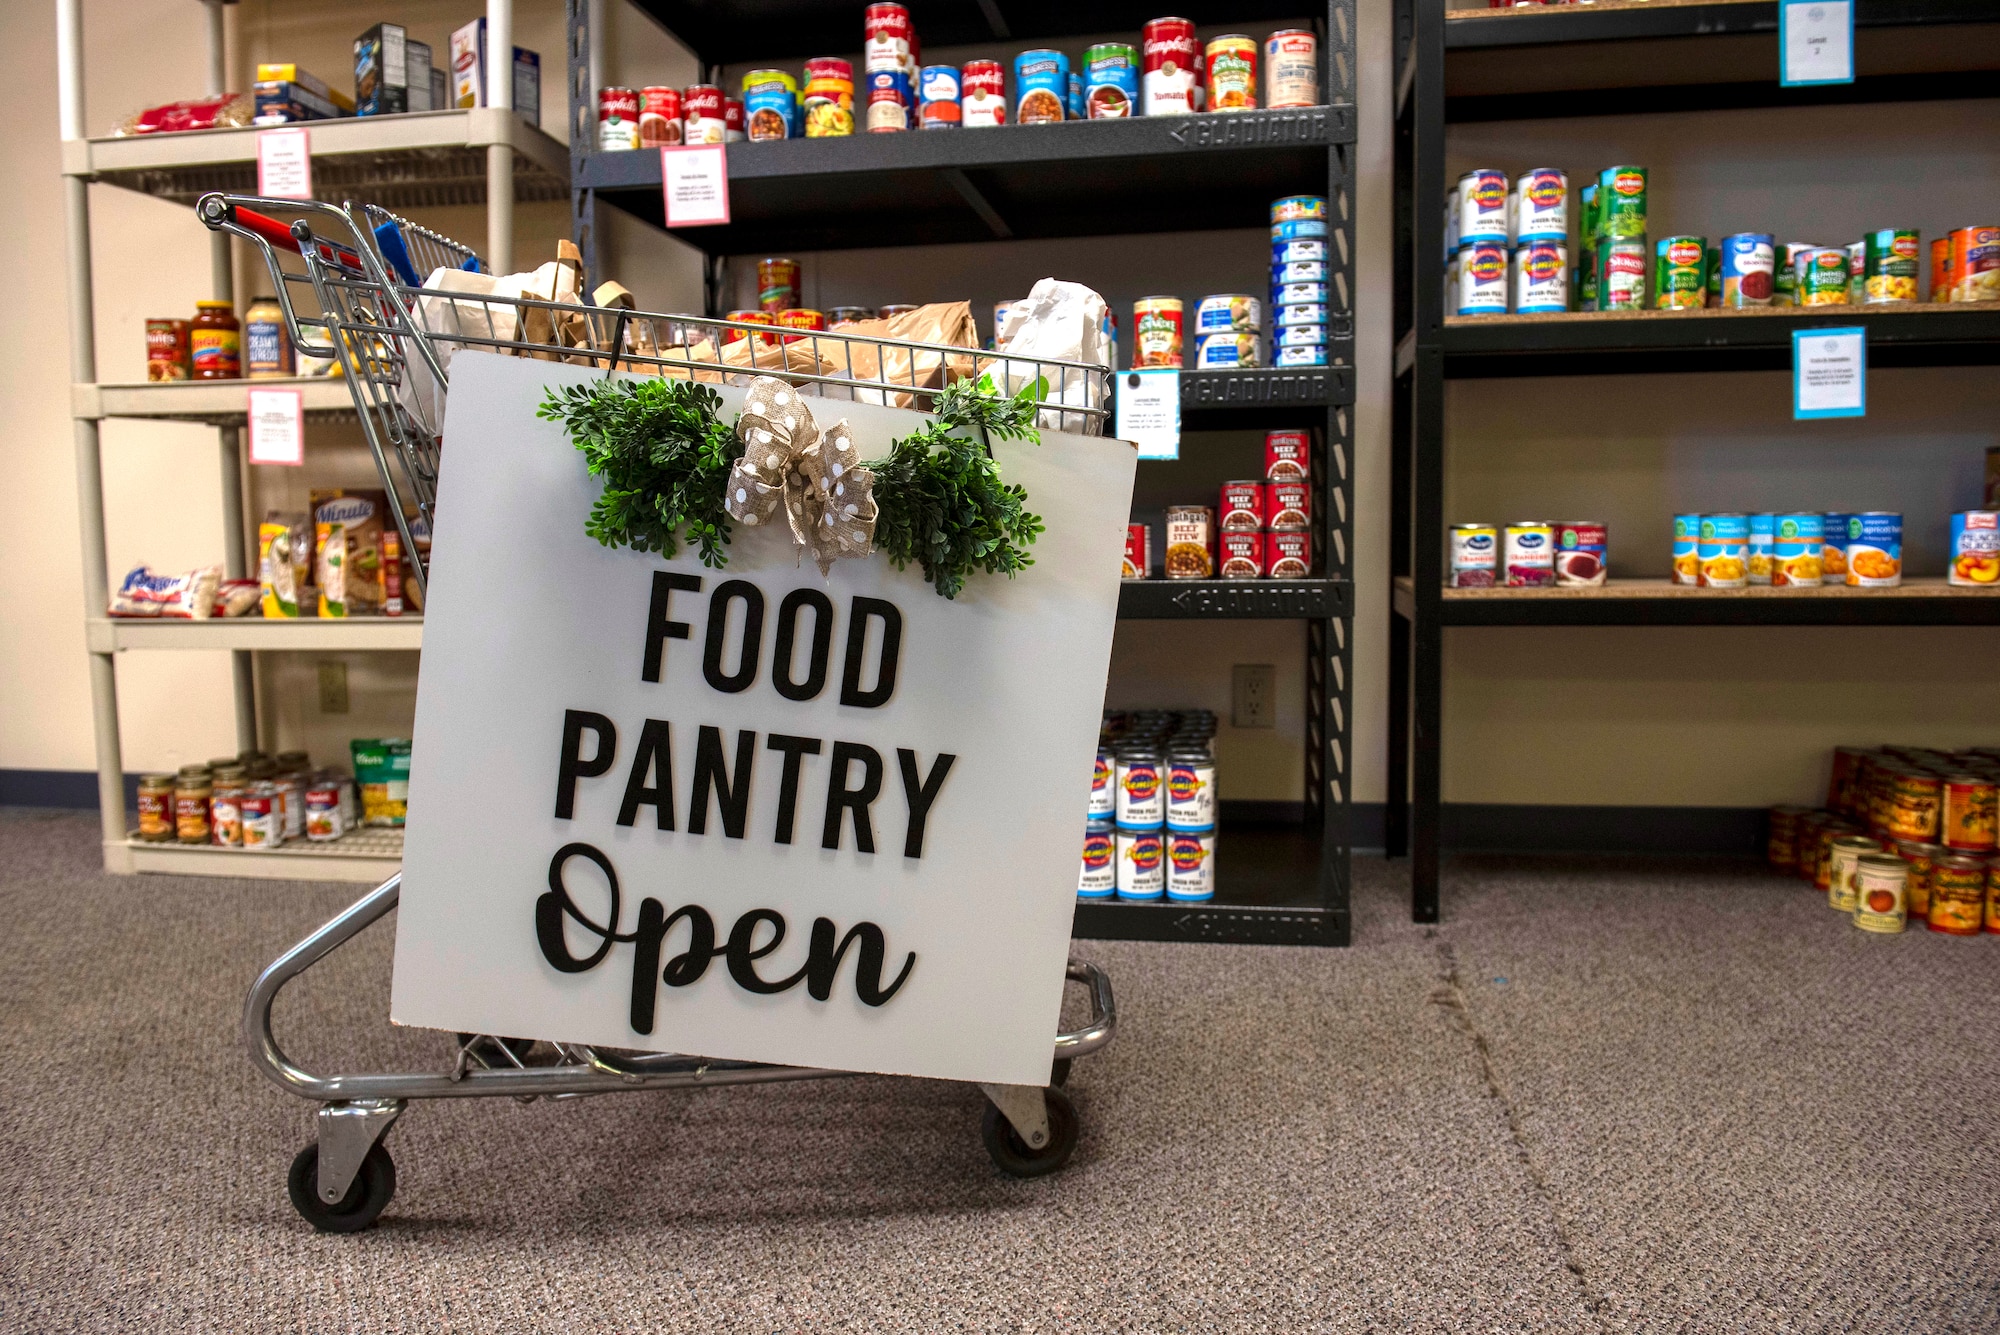 A welcome sign is on display at the Fairchild Food Pantry at Fairchild Air Force Base, Washington, May 25th, 2023. A wide variety of unperishable goods, toiletries, baby supplies, and pet food is offered to Airmen and their families free of charge. (U.S. Air Force photo by Airman 1st Class Lillian Patterson)